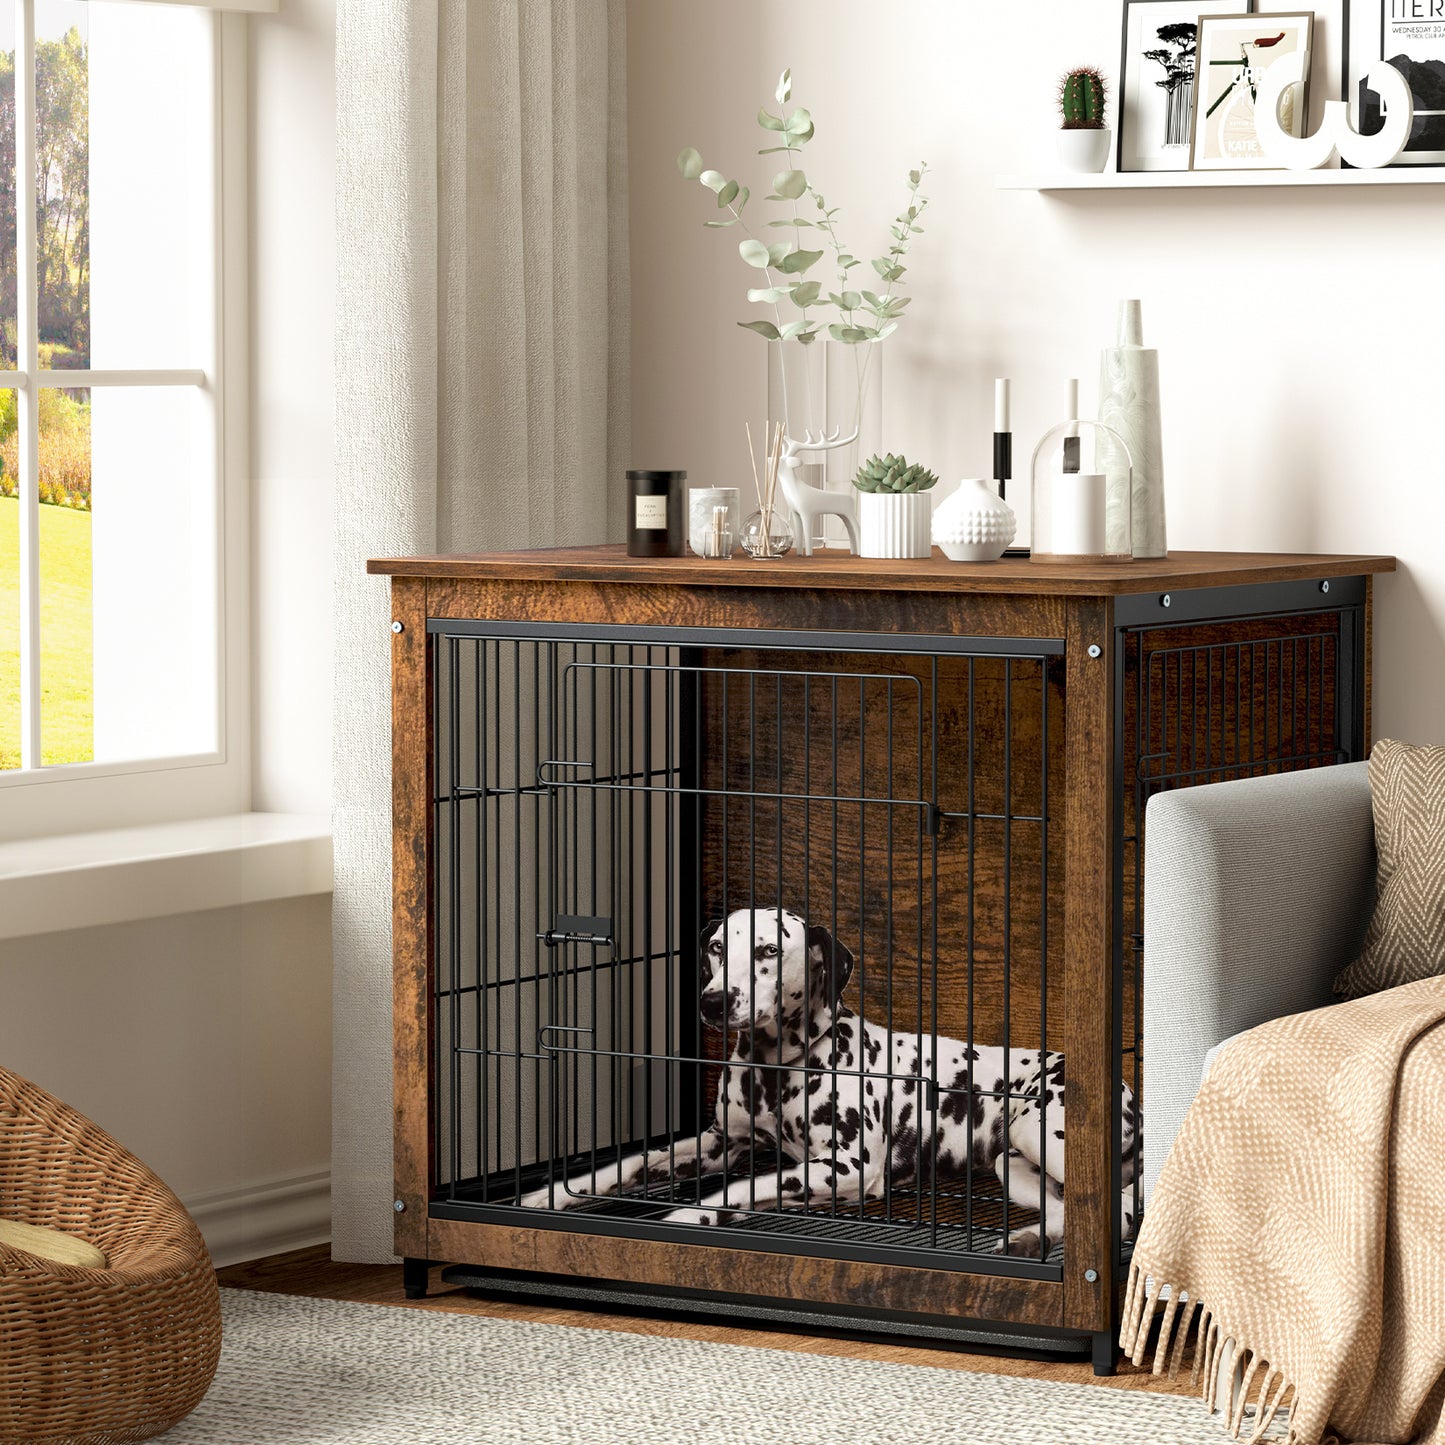 Furniture Dog Cage End Table Wooden Crate Double Door & Tray